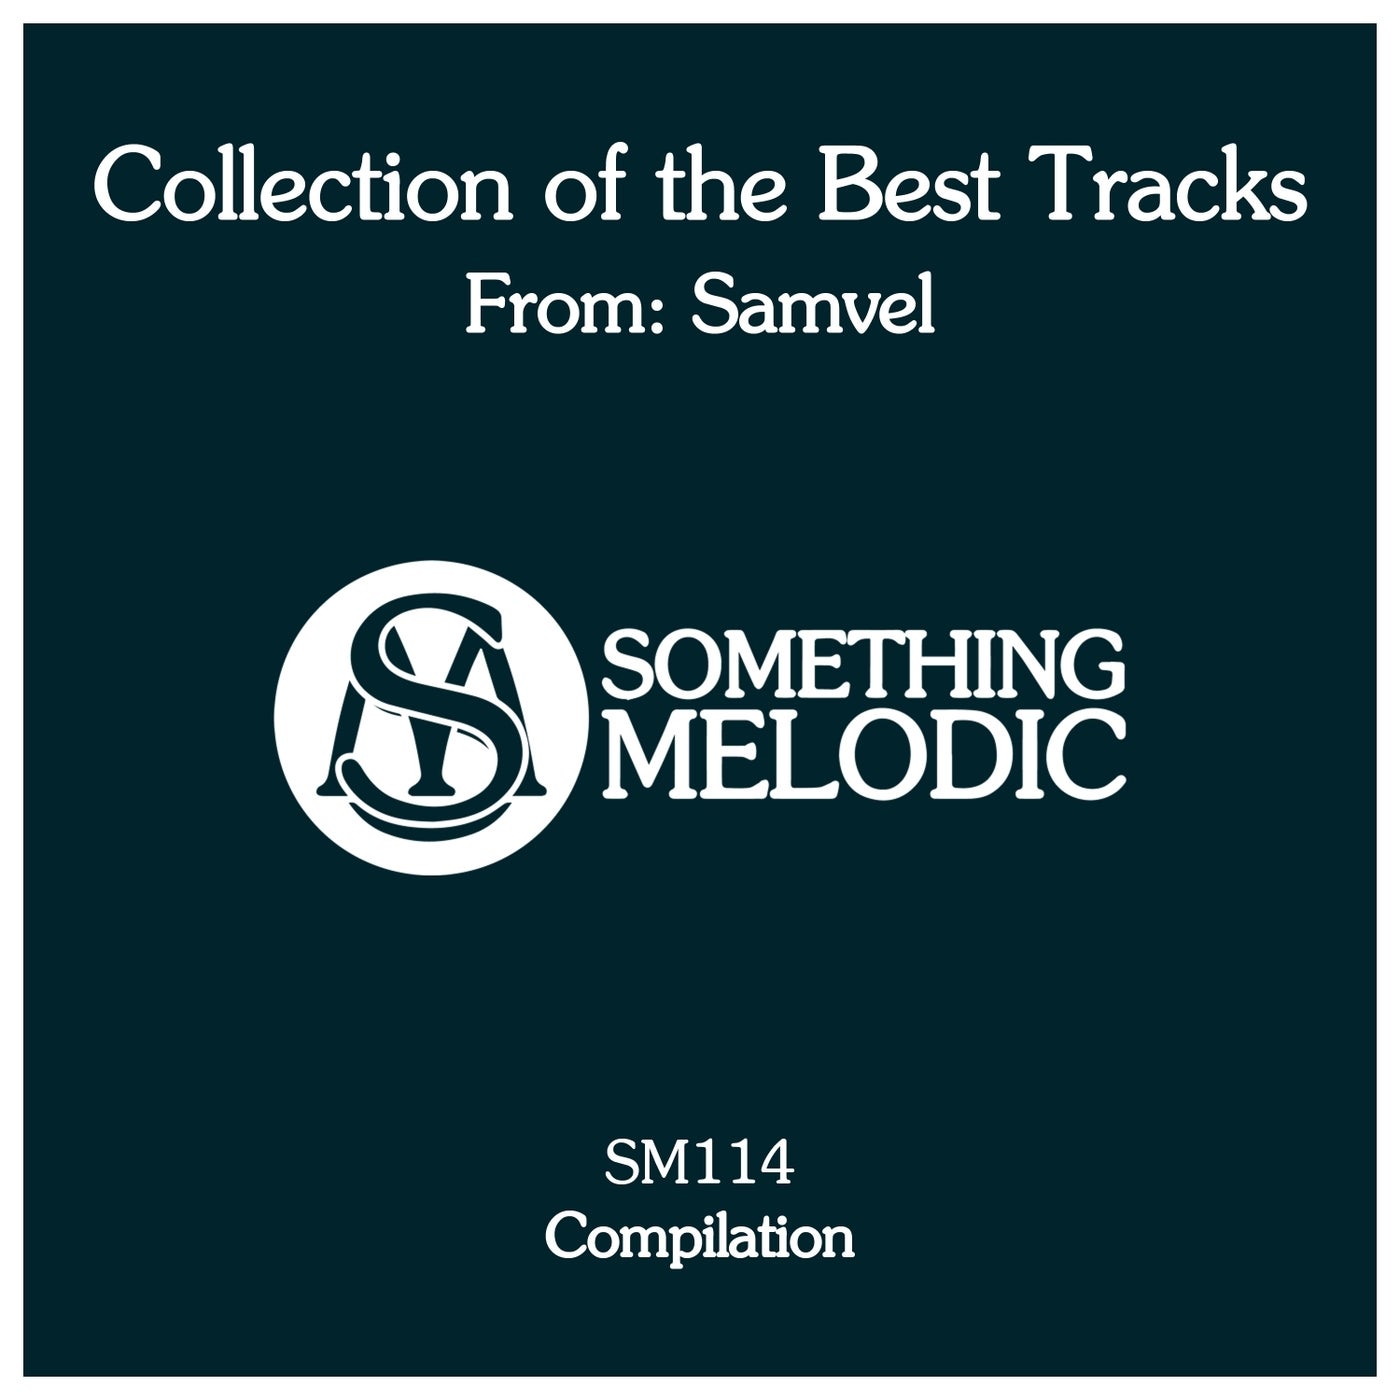 Collection of the Best Tracks From: Samvel